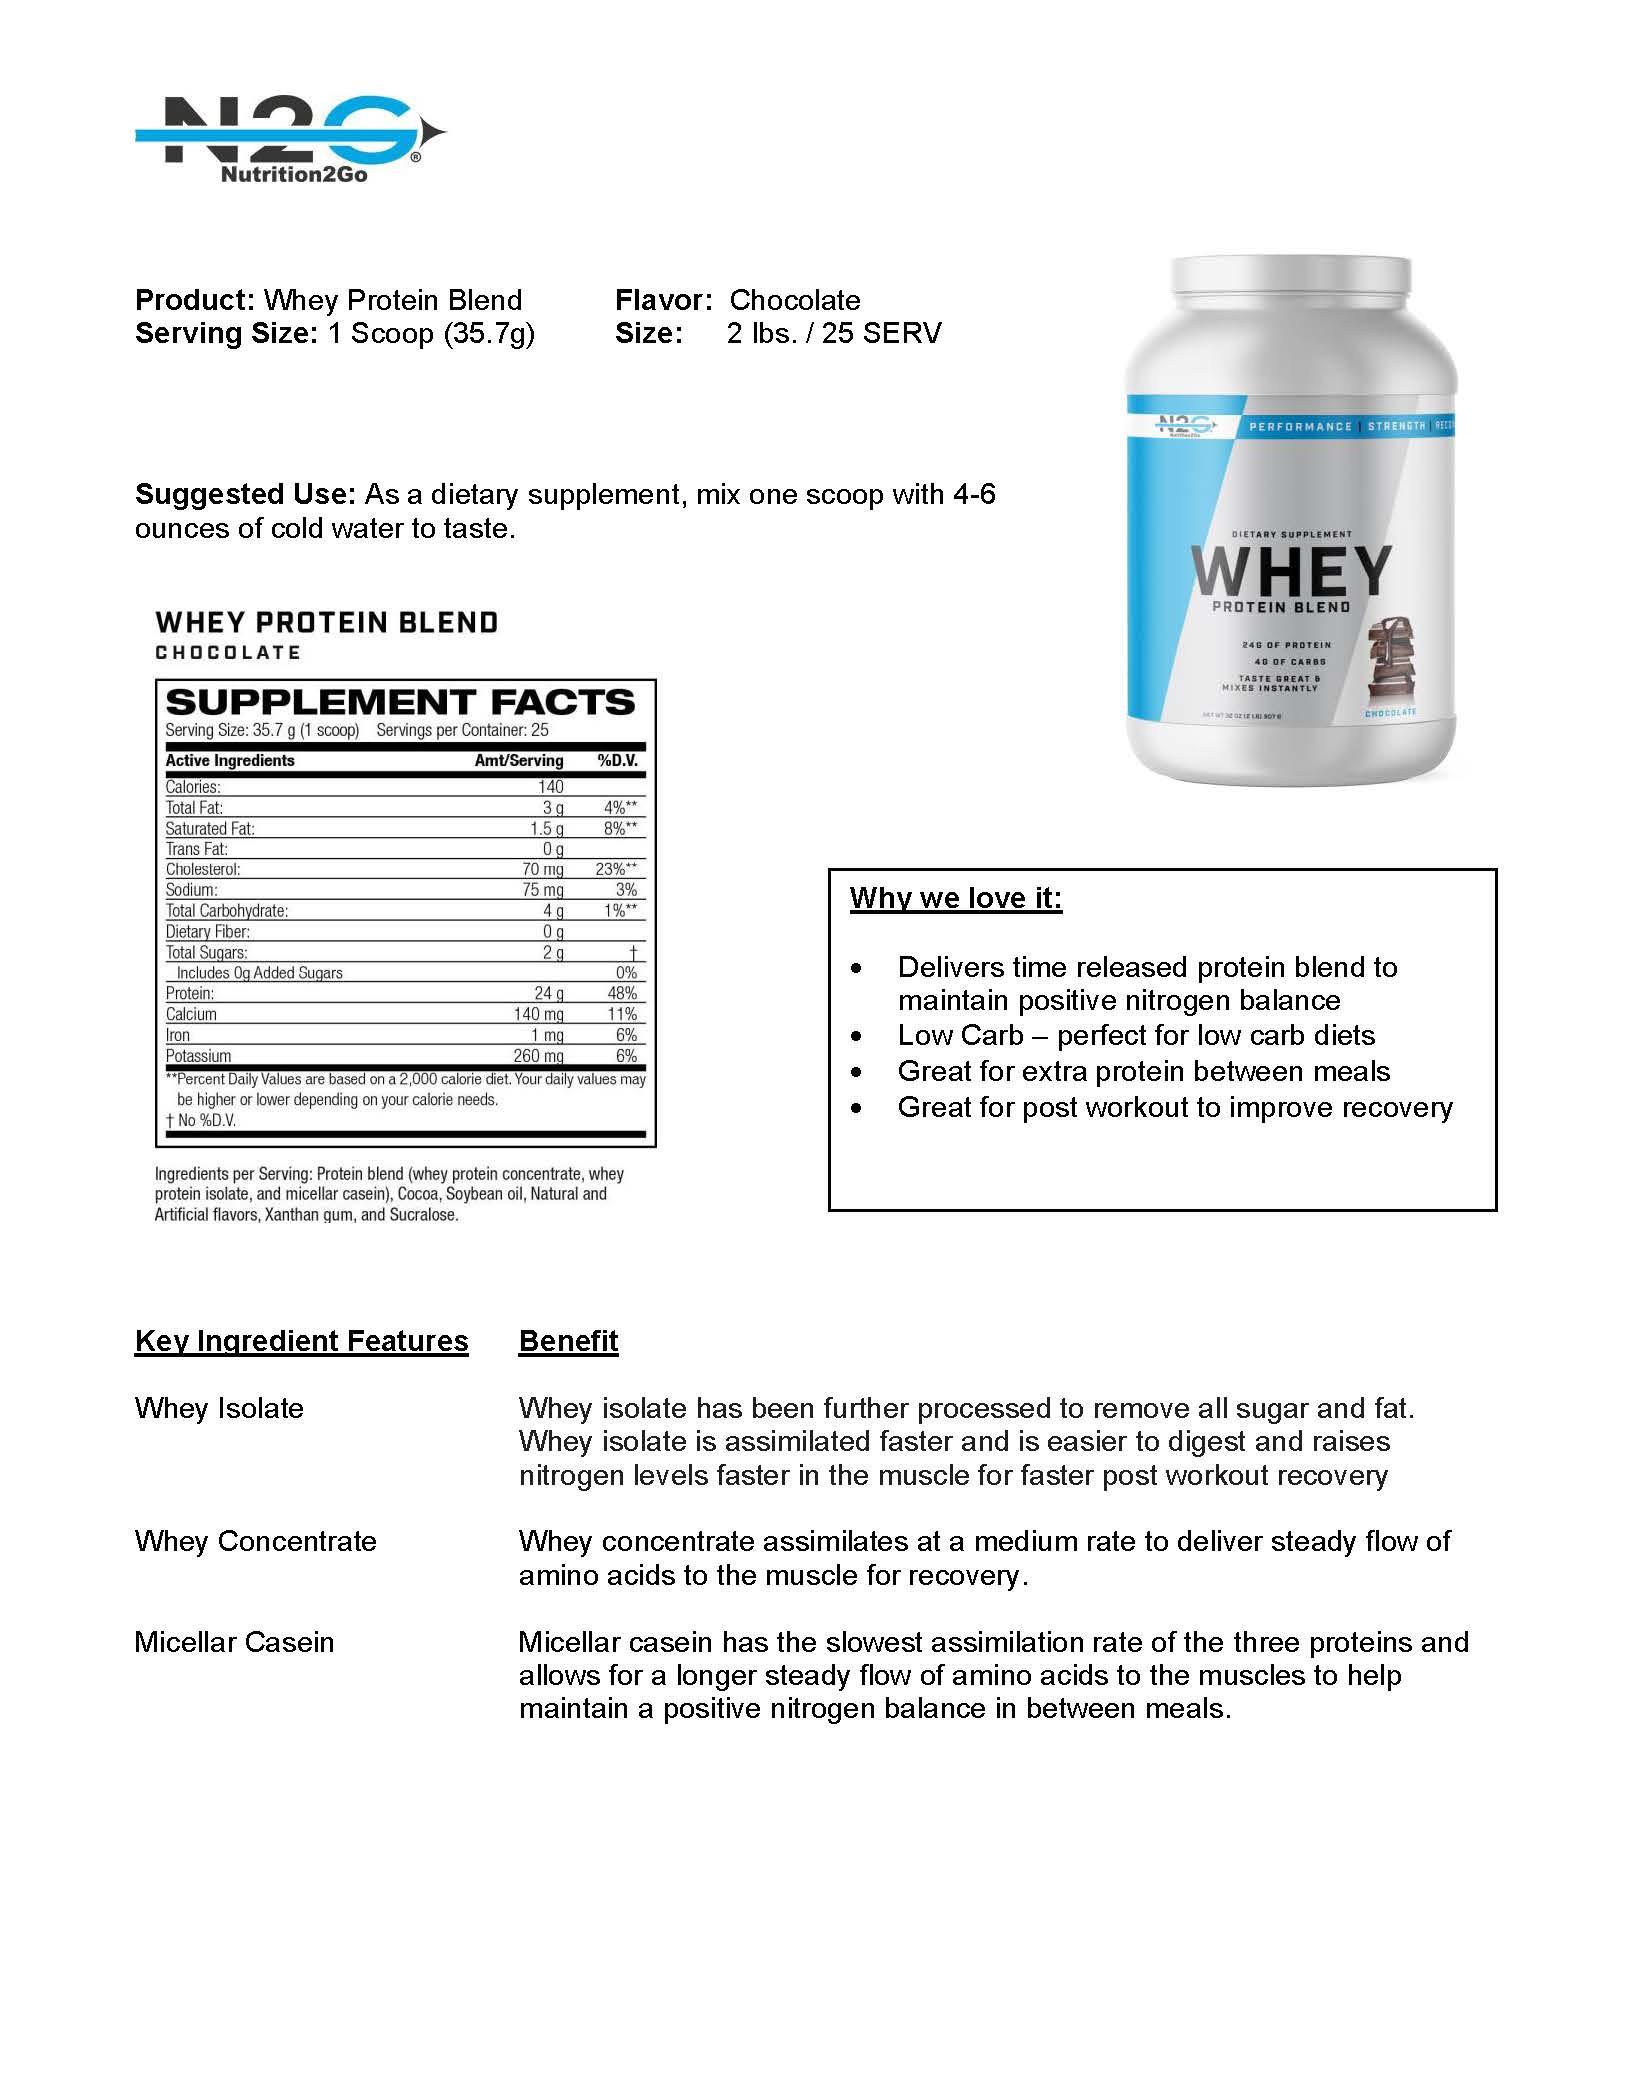 N2G Whey Protein Blend, Chocolate Fact Sheet